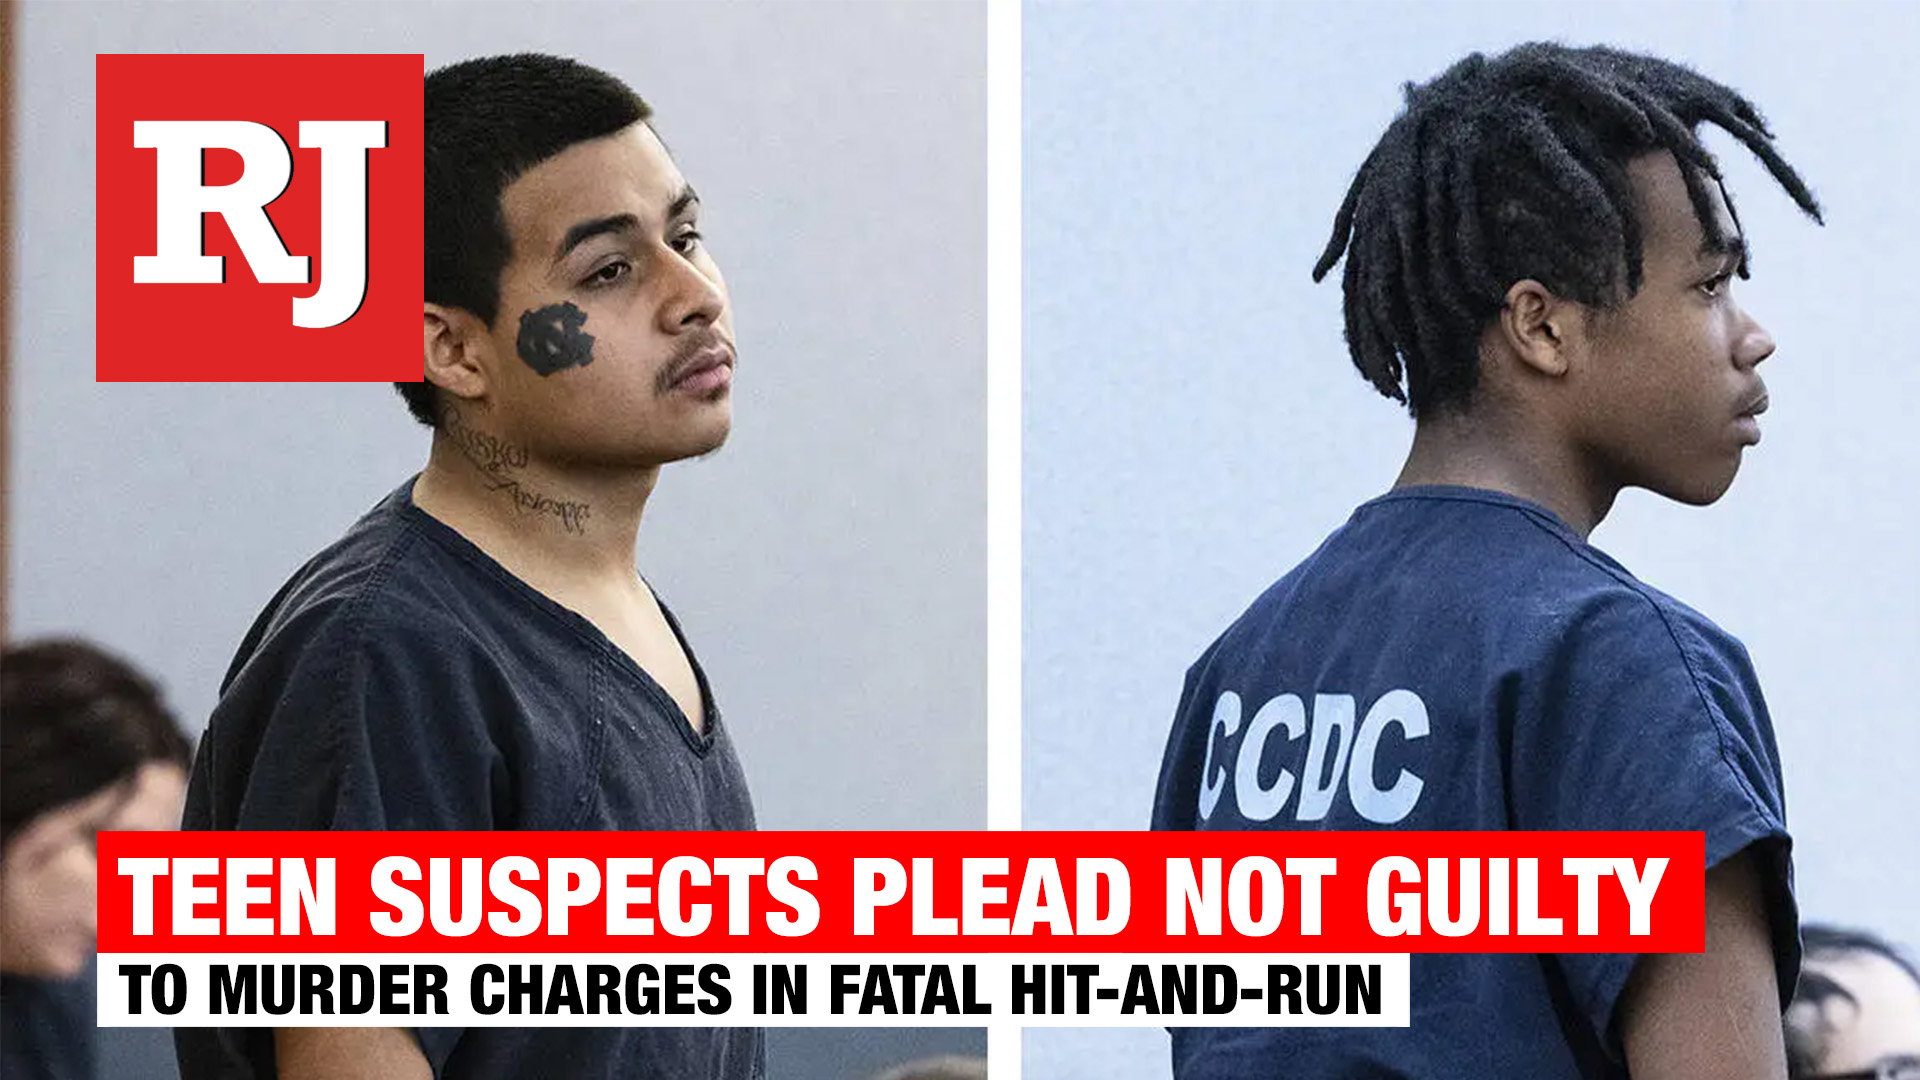 Teen suspects plead not guilty to murder charges in fatal hit-and-run